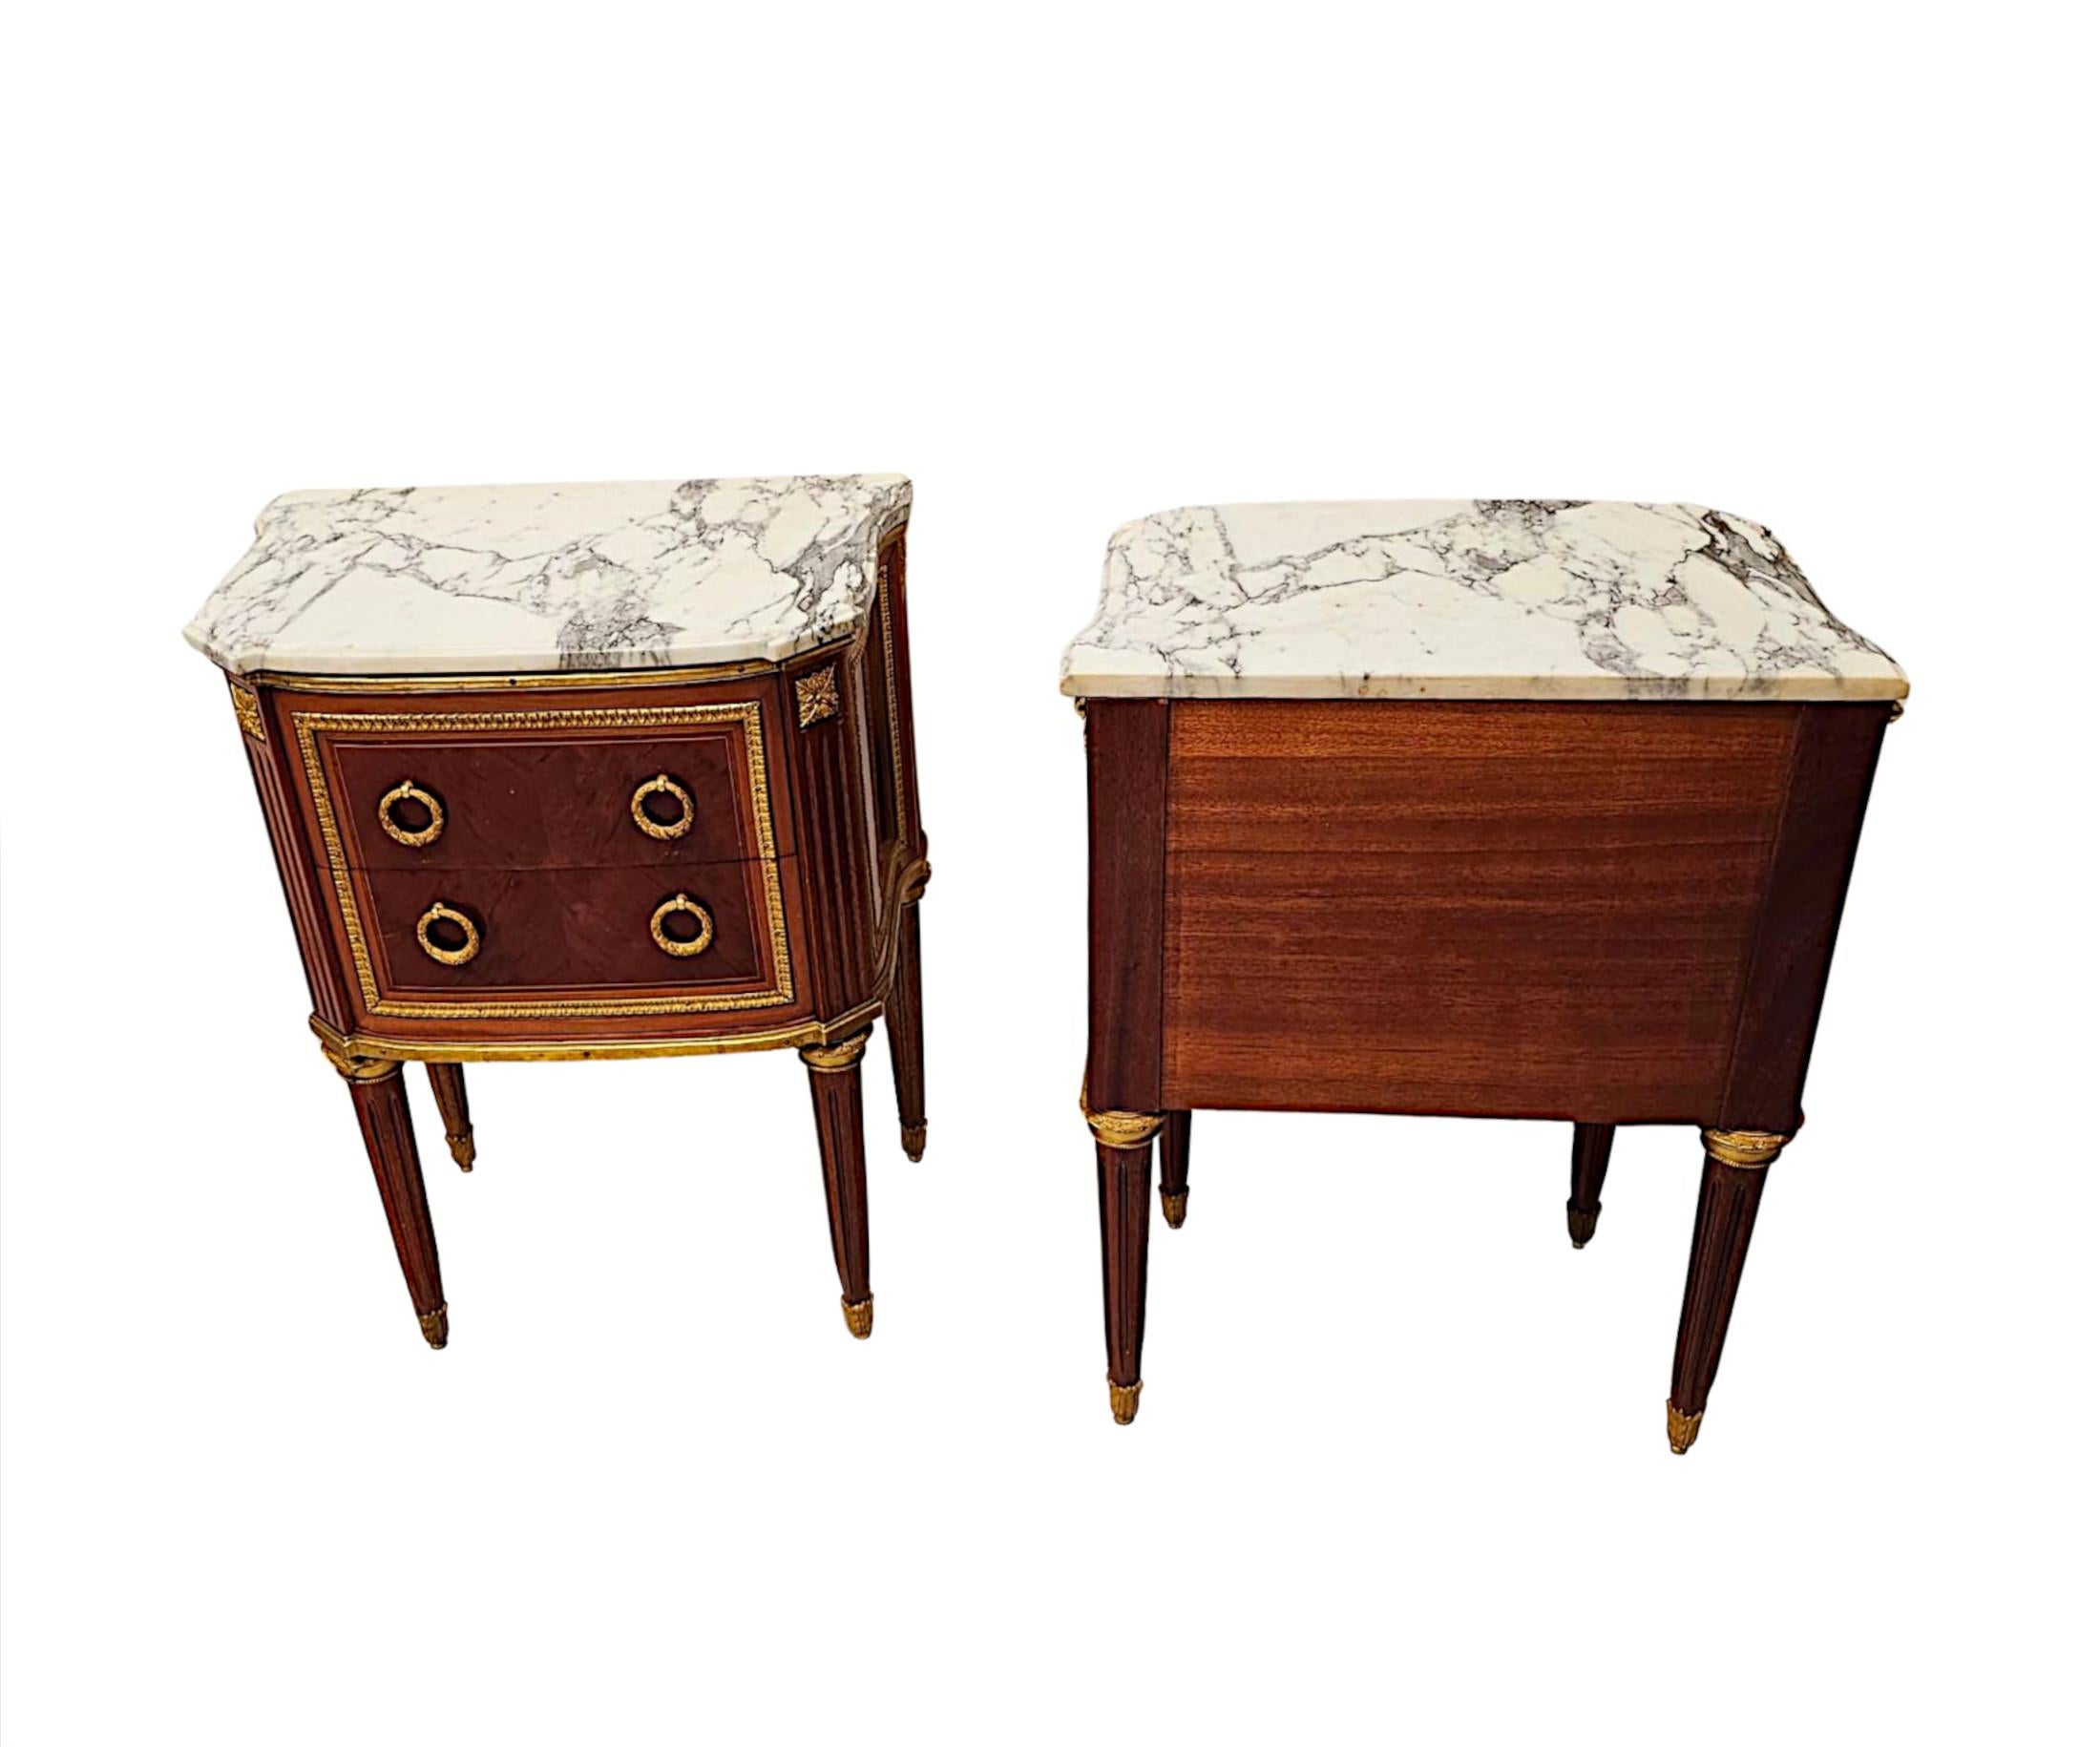 A  Fine 20th Century Pair of Marble Top Side Tables or Chests with Ormolu Mounts For Sale 2